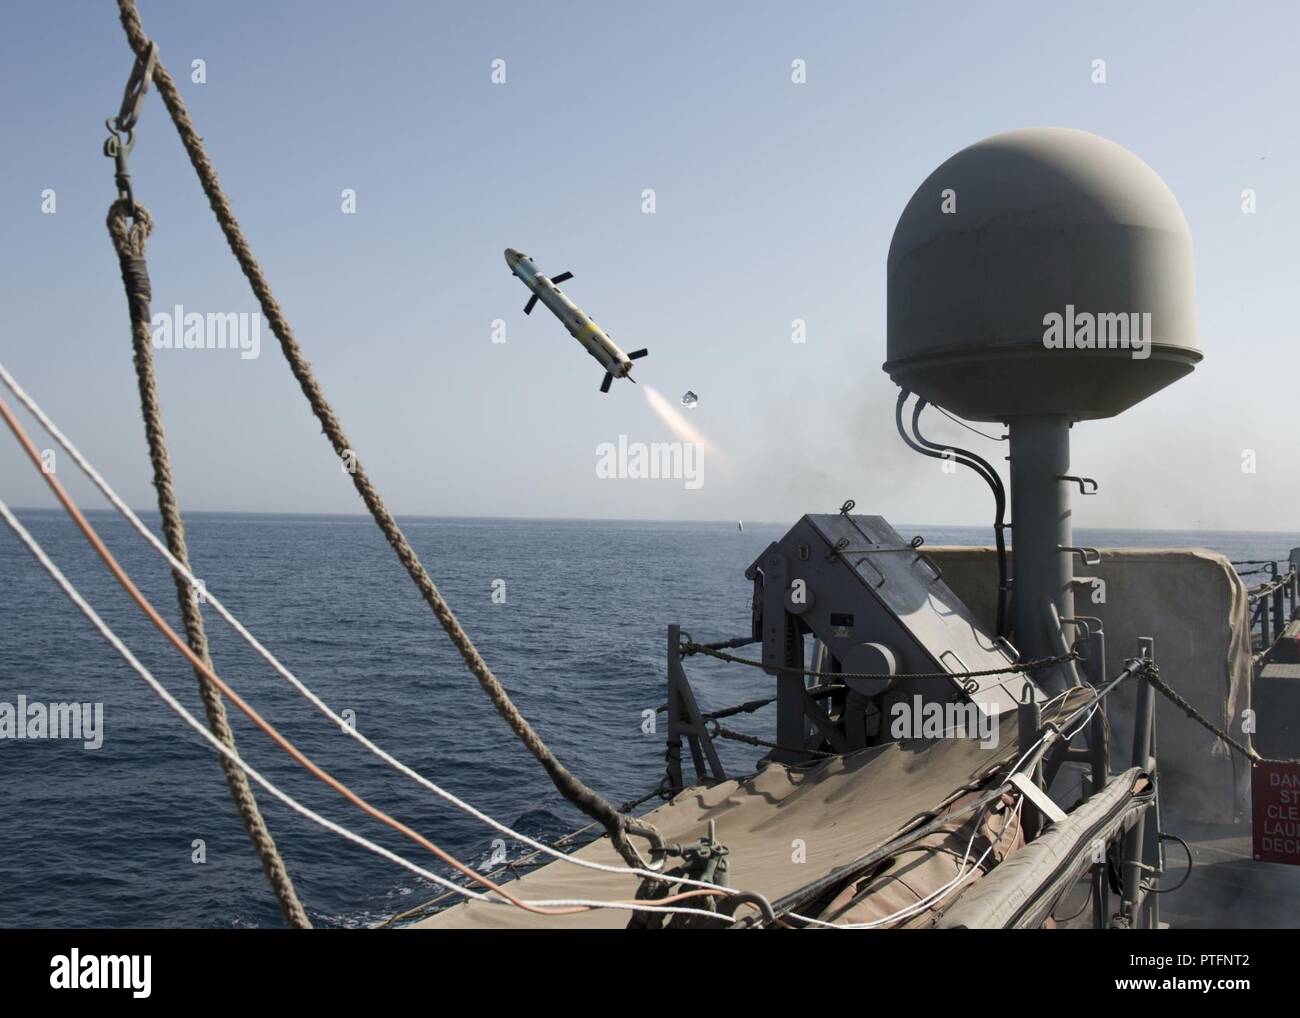 ARABIAN GULF (July 20, 2017) A griffin missile is launched from coastal patrol ship USS Thunderbolt (PC 12) during a test and proficiency fire exercise, July 18. USS Chinook is one of ten coastal patrol ships assigned to Coastal Patrol Squadron (PCRON) 1 home-ported in Manama, Bahrain in support of maritime security operations and theatre security cooperation efforts in the U.S. 5th Fleet area of operations. Stock Photo